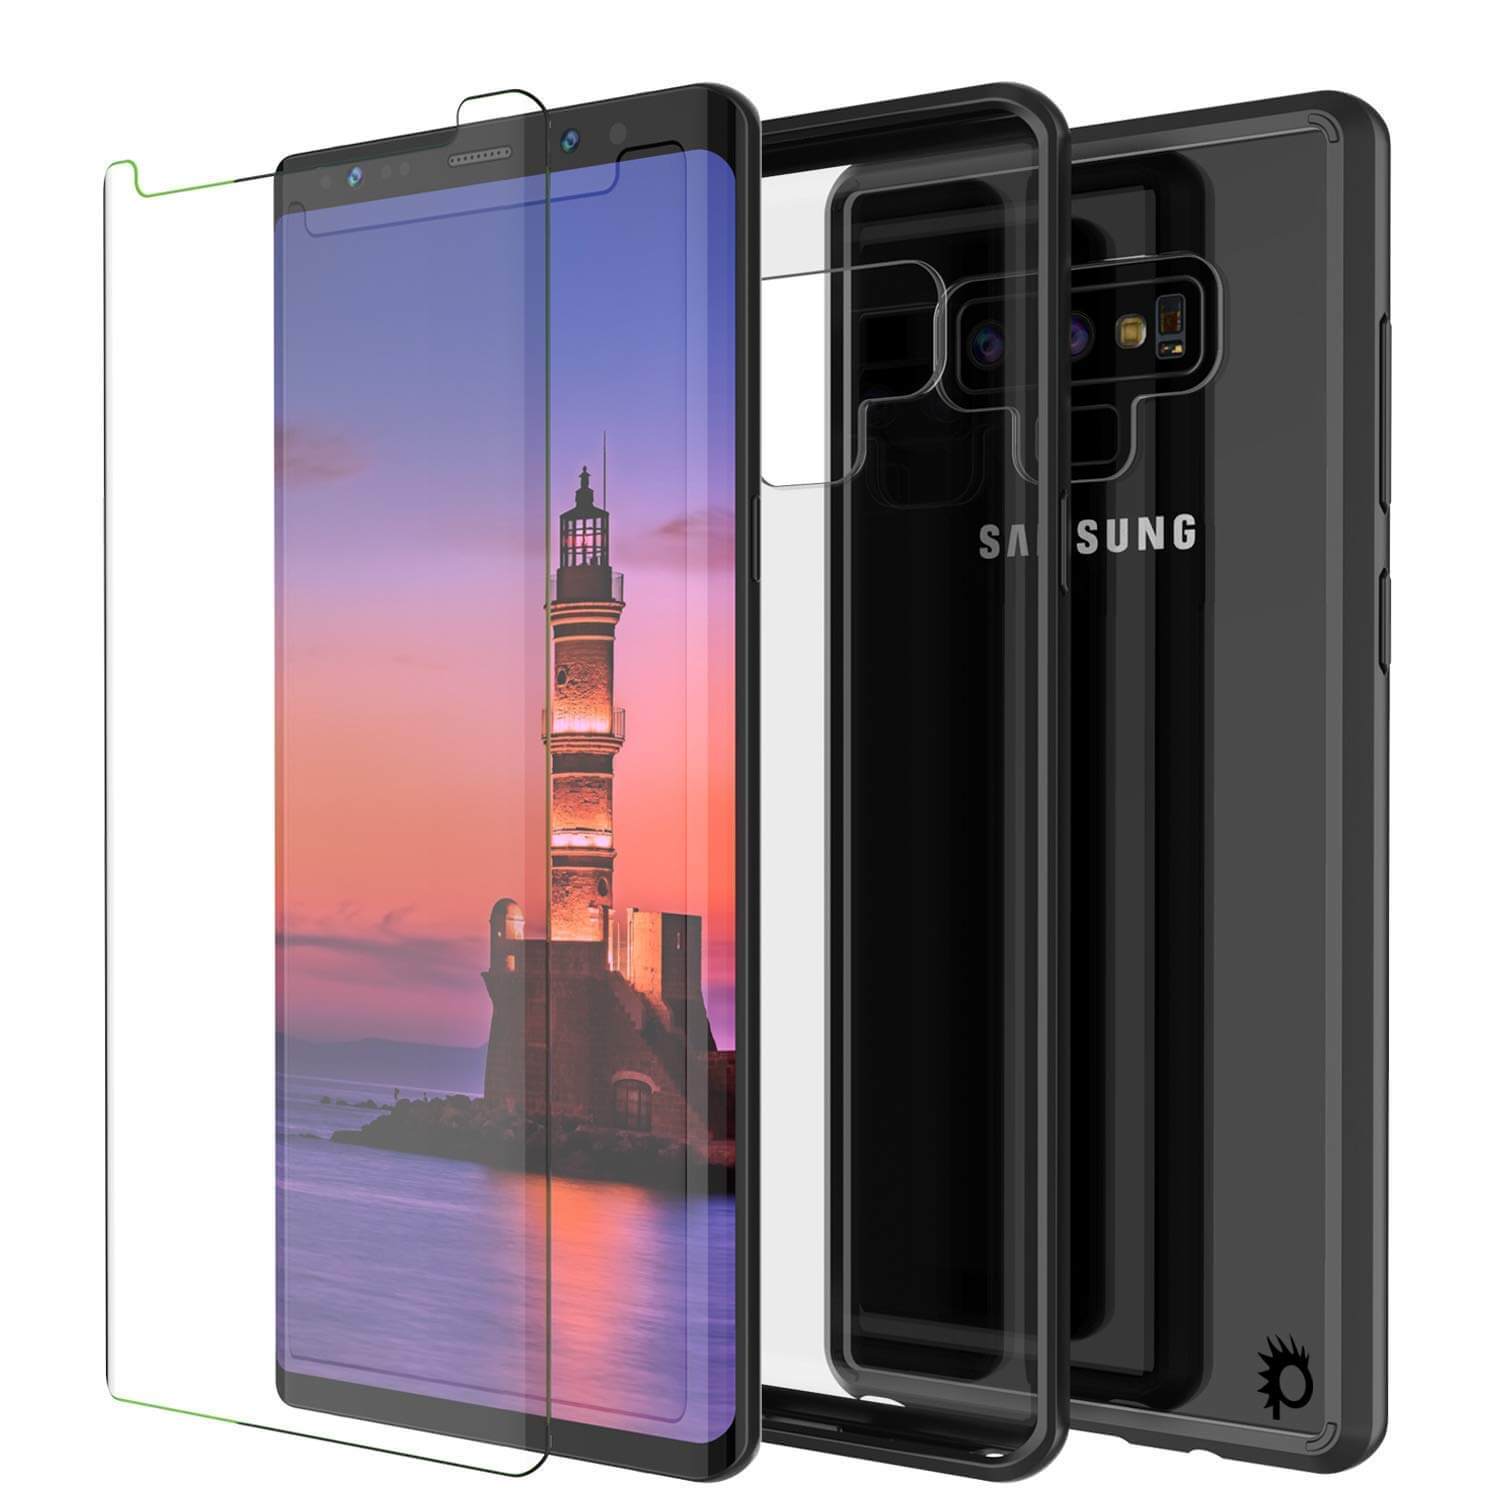 Galaxy Note 9 Punkcase Lucid-2.0 Series Slim Fit Armor Black Case Cover